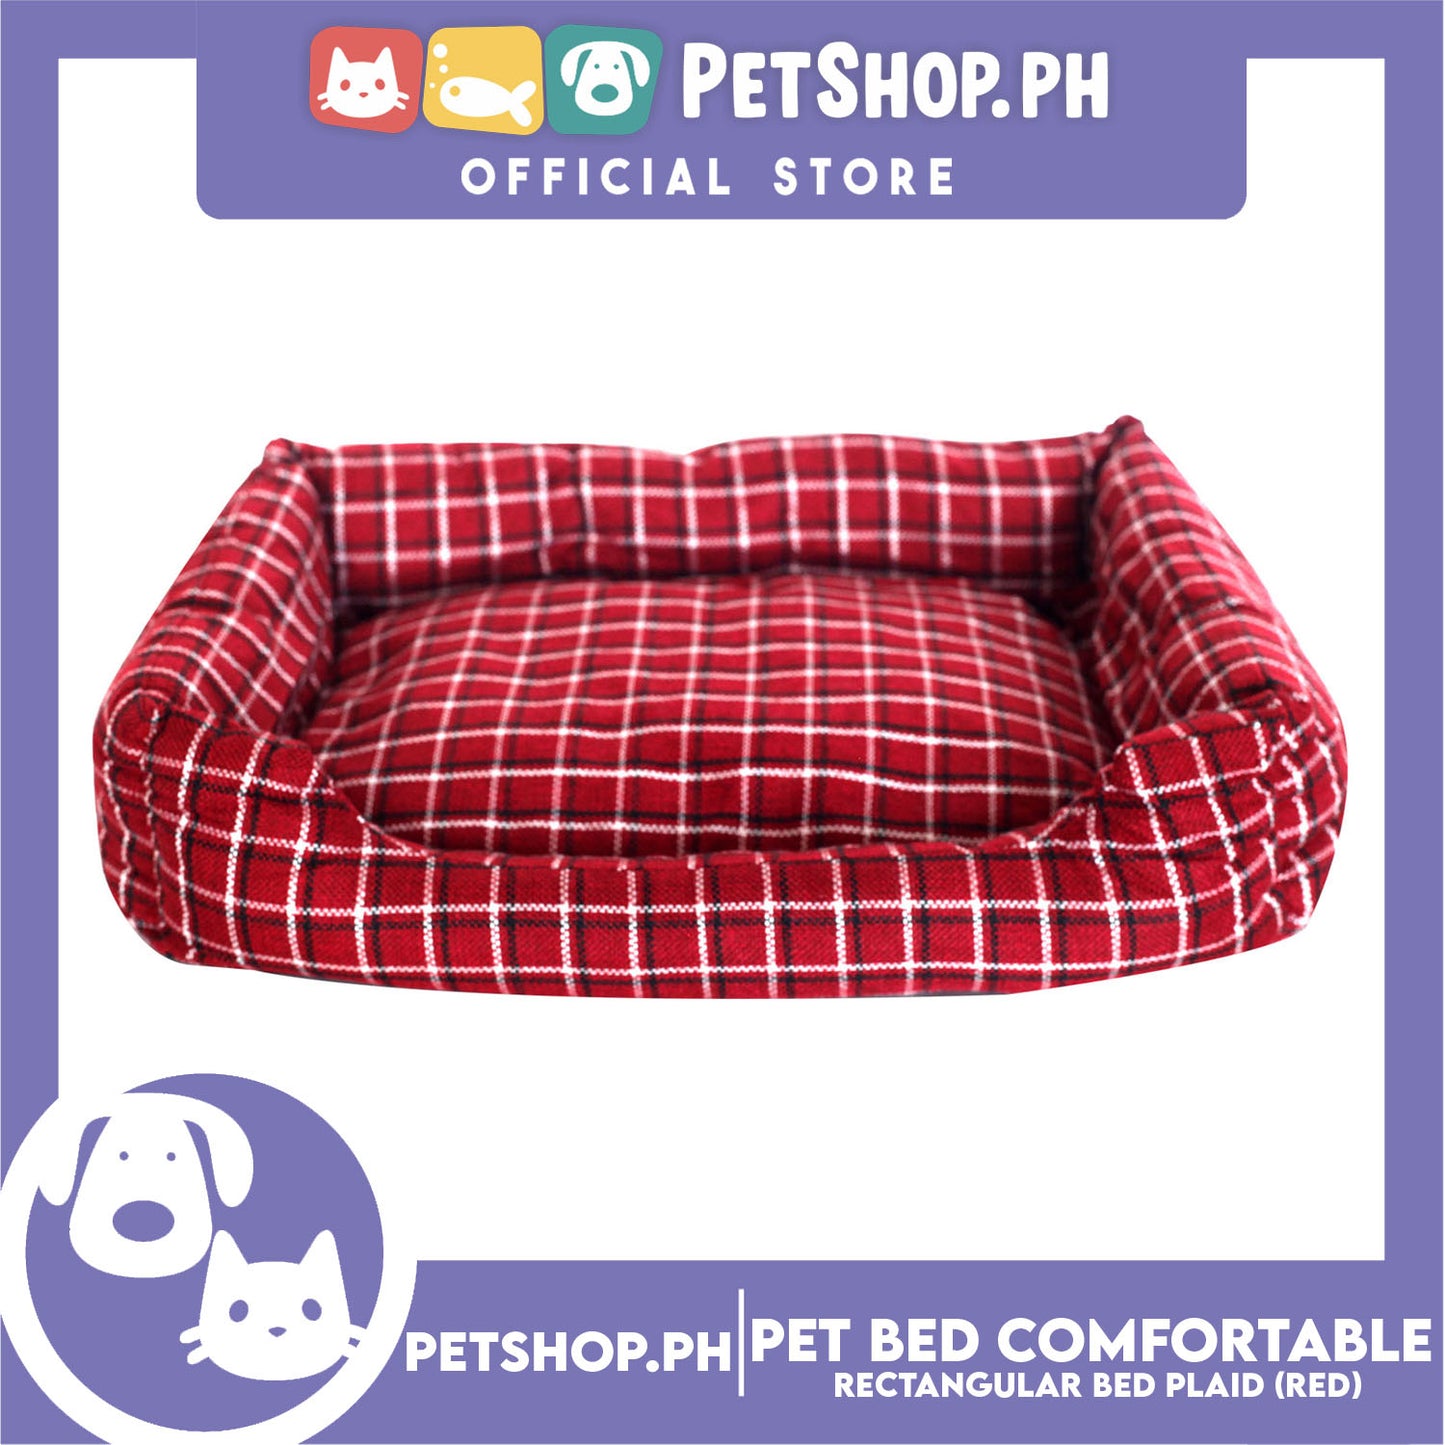 Pet Bed Comfortable Rectangular Pet Bed Plaid Design 42x33x8cm Small for Dogs & Cats (Red)